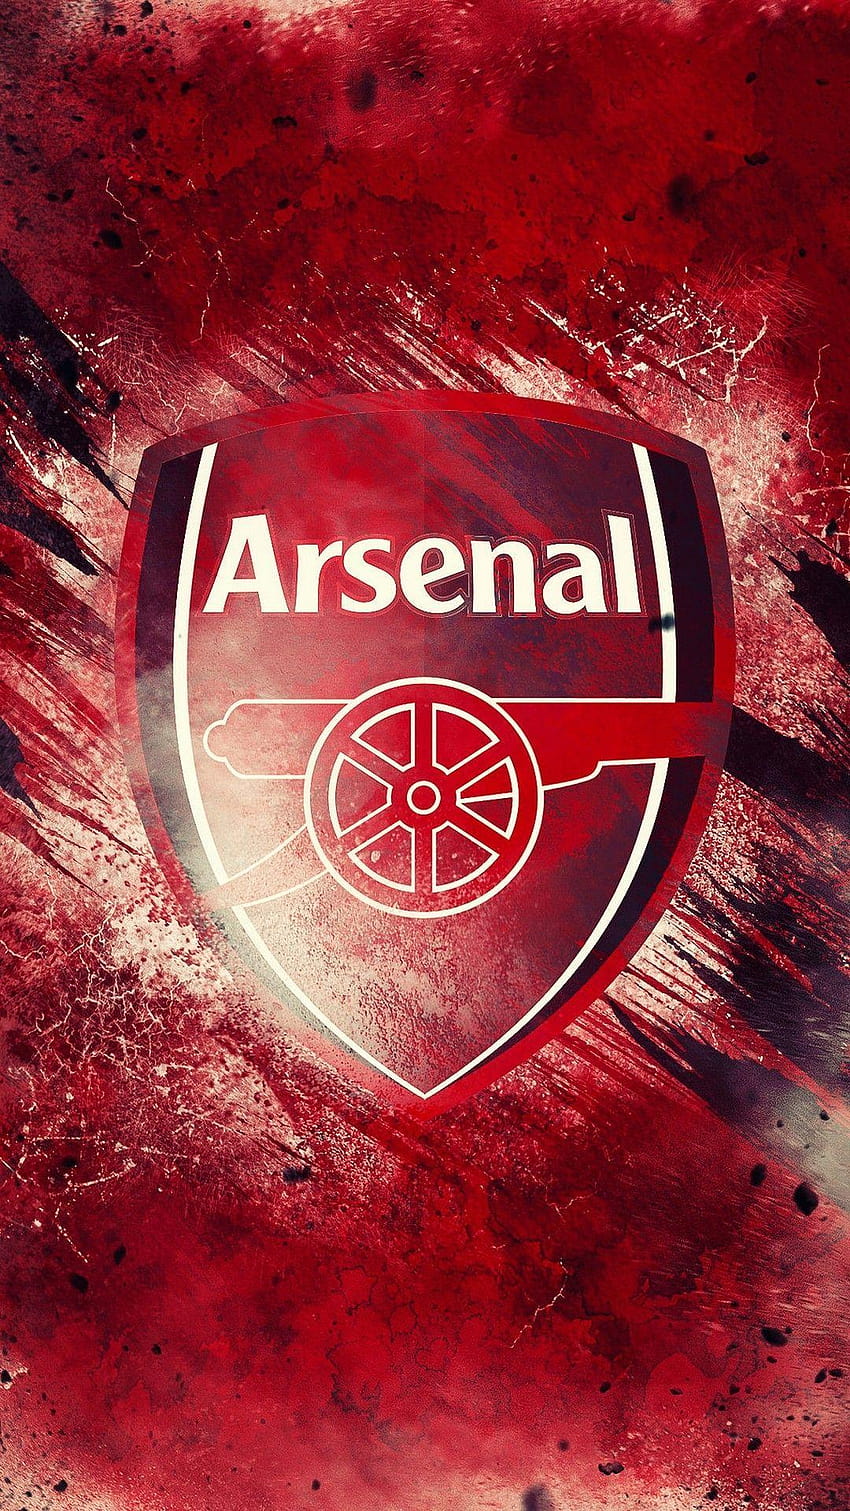 I made a simple sleek Arsenal wallpaper for my iPhone 4 and want to share  it with you  rGunners